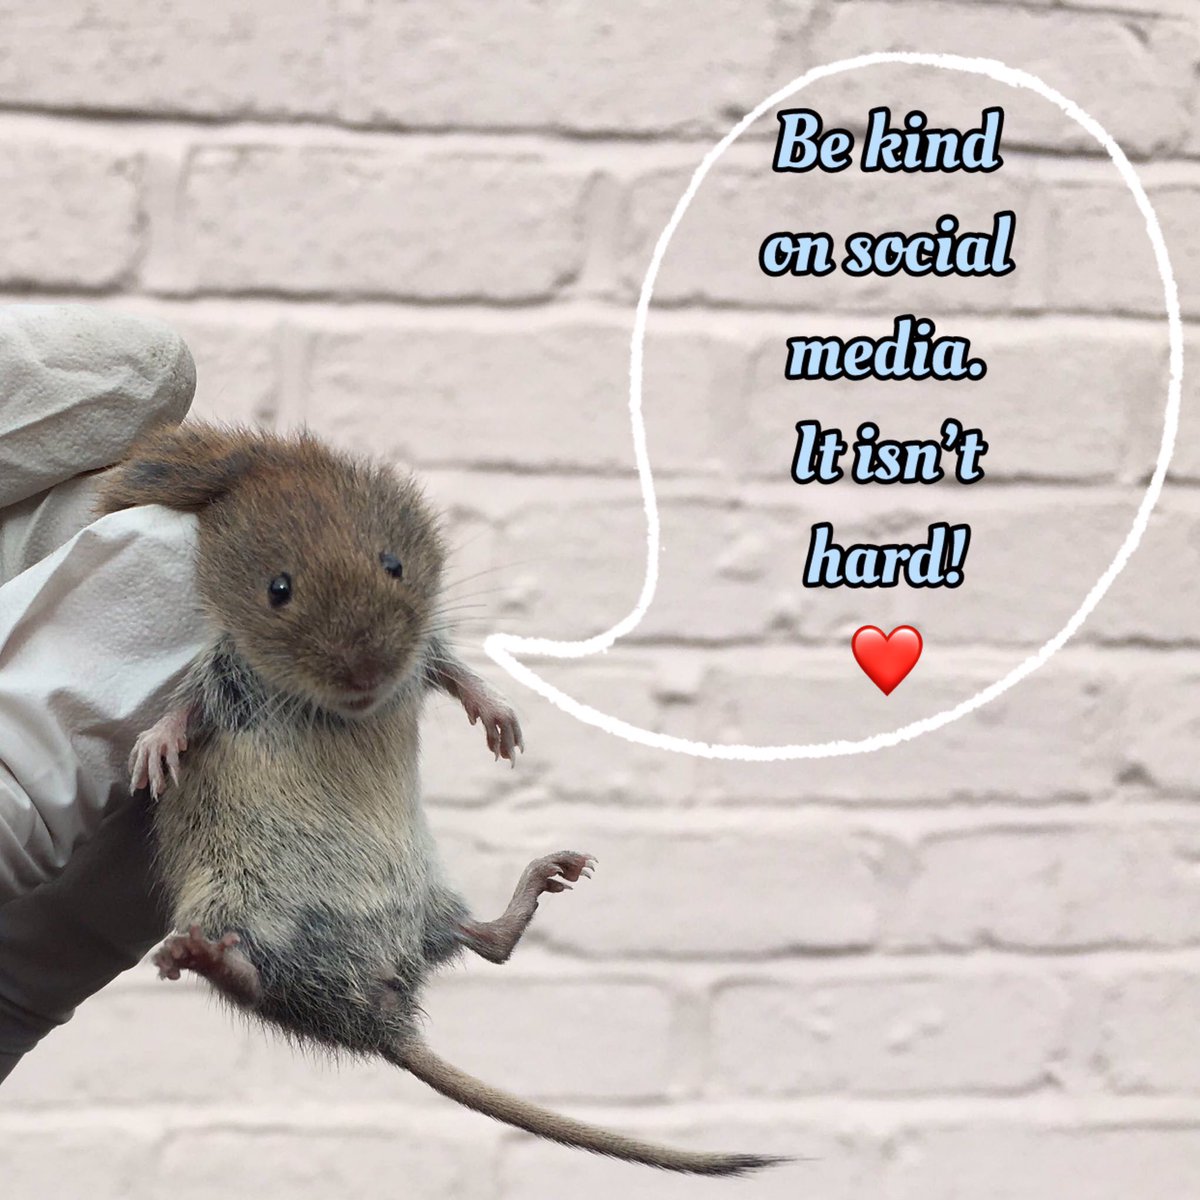 Sadly, even in wildlife community, I see rude & hurtful comments on social media. Remember, just because you’re writing words on a screen rather than in person doesn’t diminish damage they can do. You don’t know how fragile mental health of person reading your words is. #BeKind